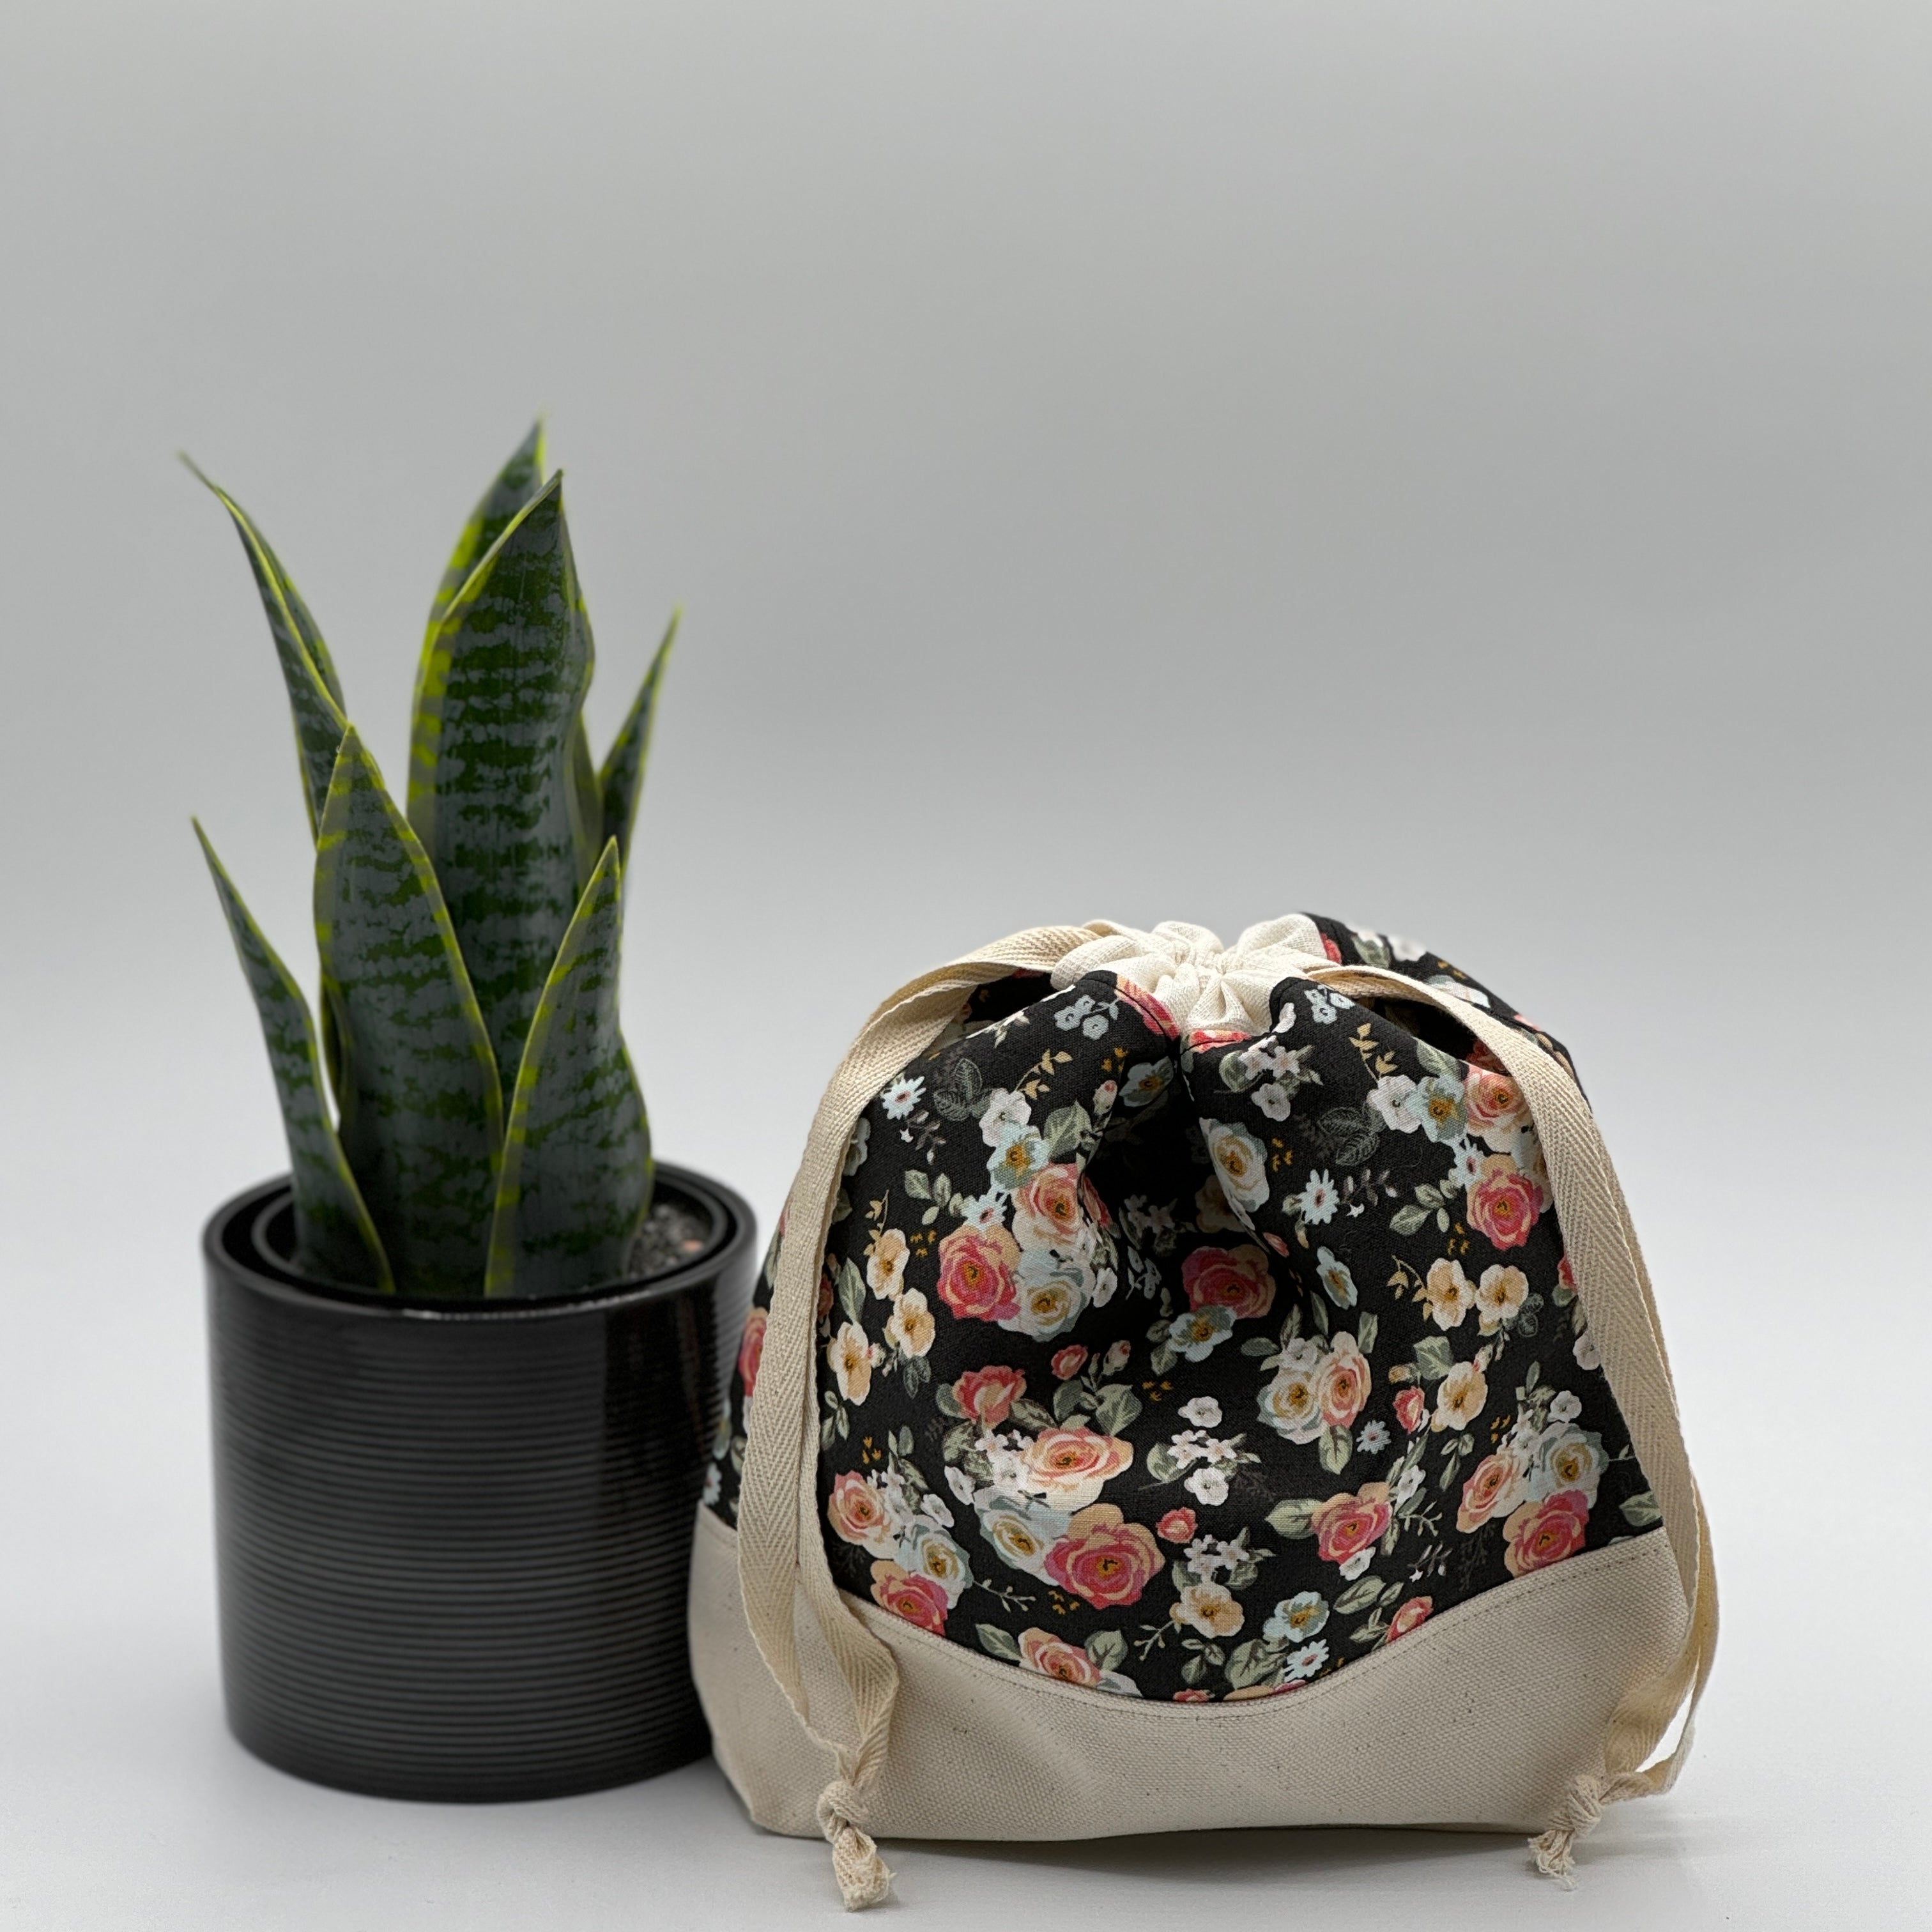 Petit sac à projet / Small project bag - Gingham Gardens - Floral Charcoal